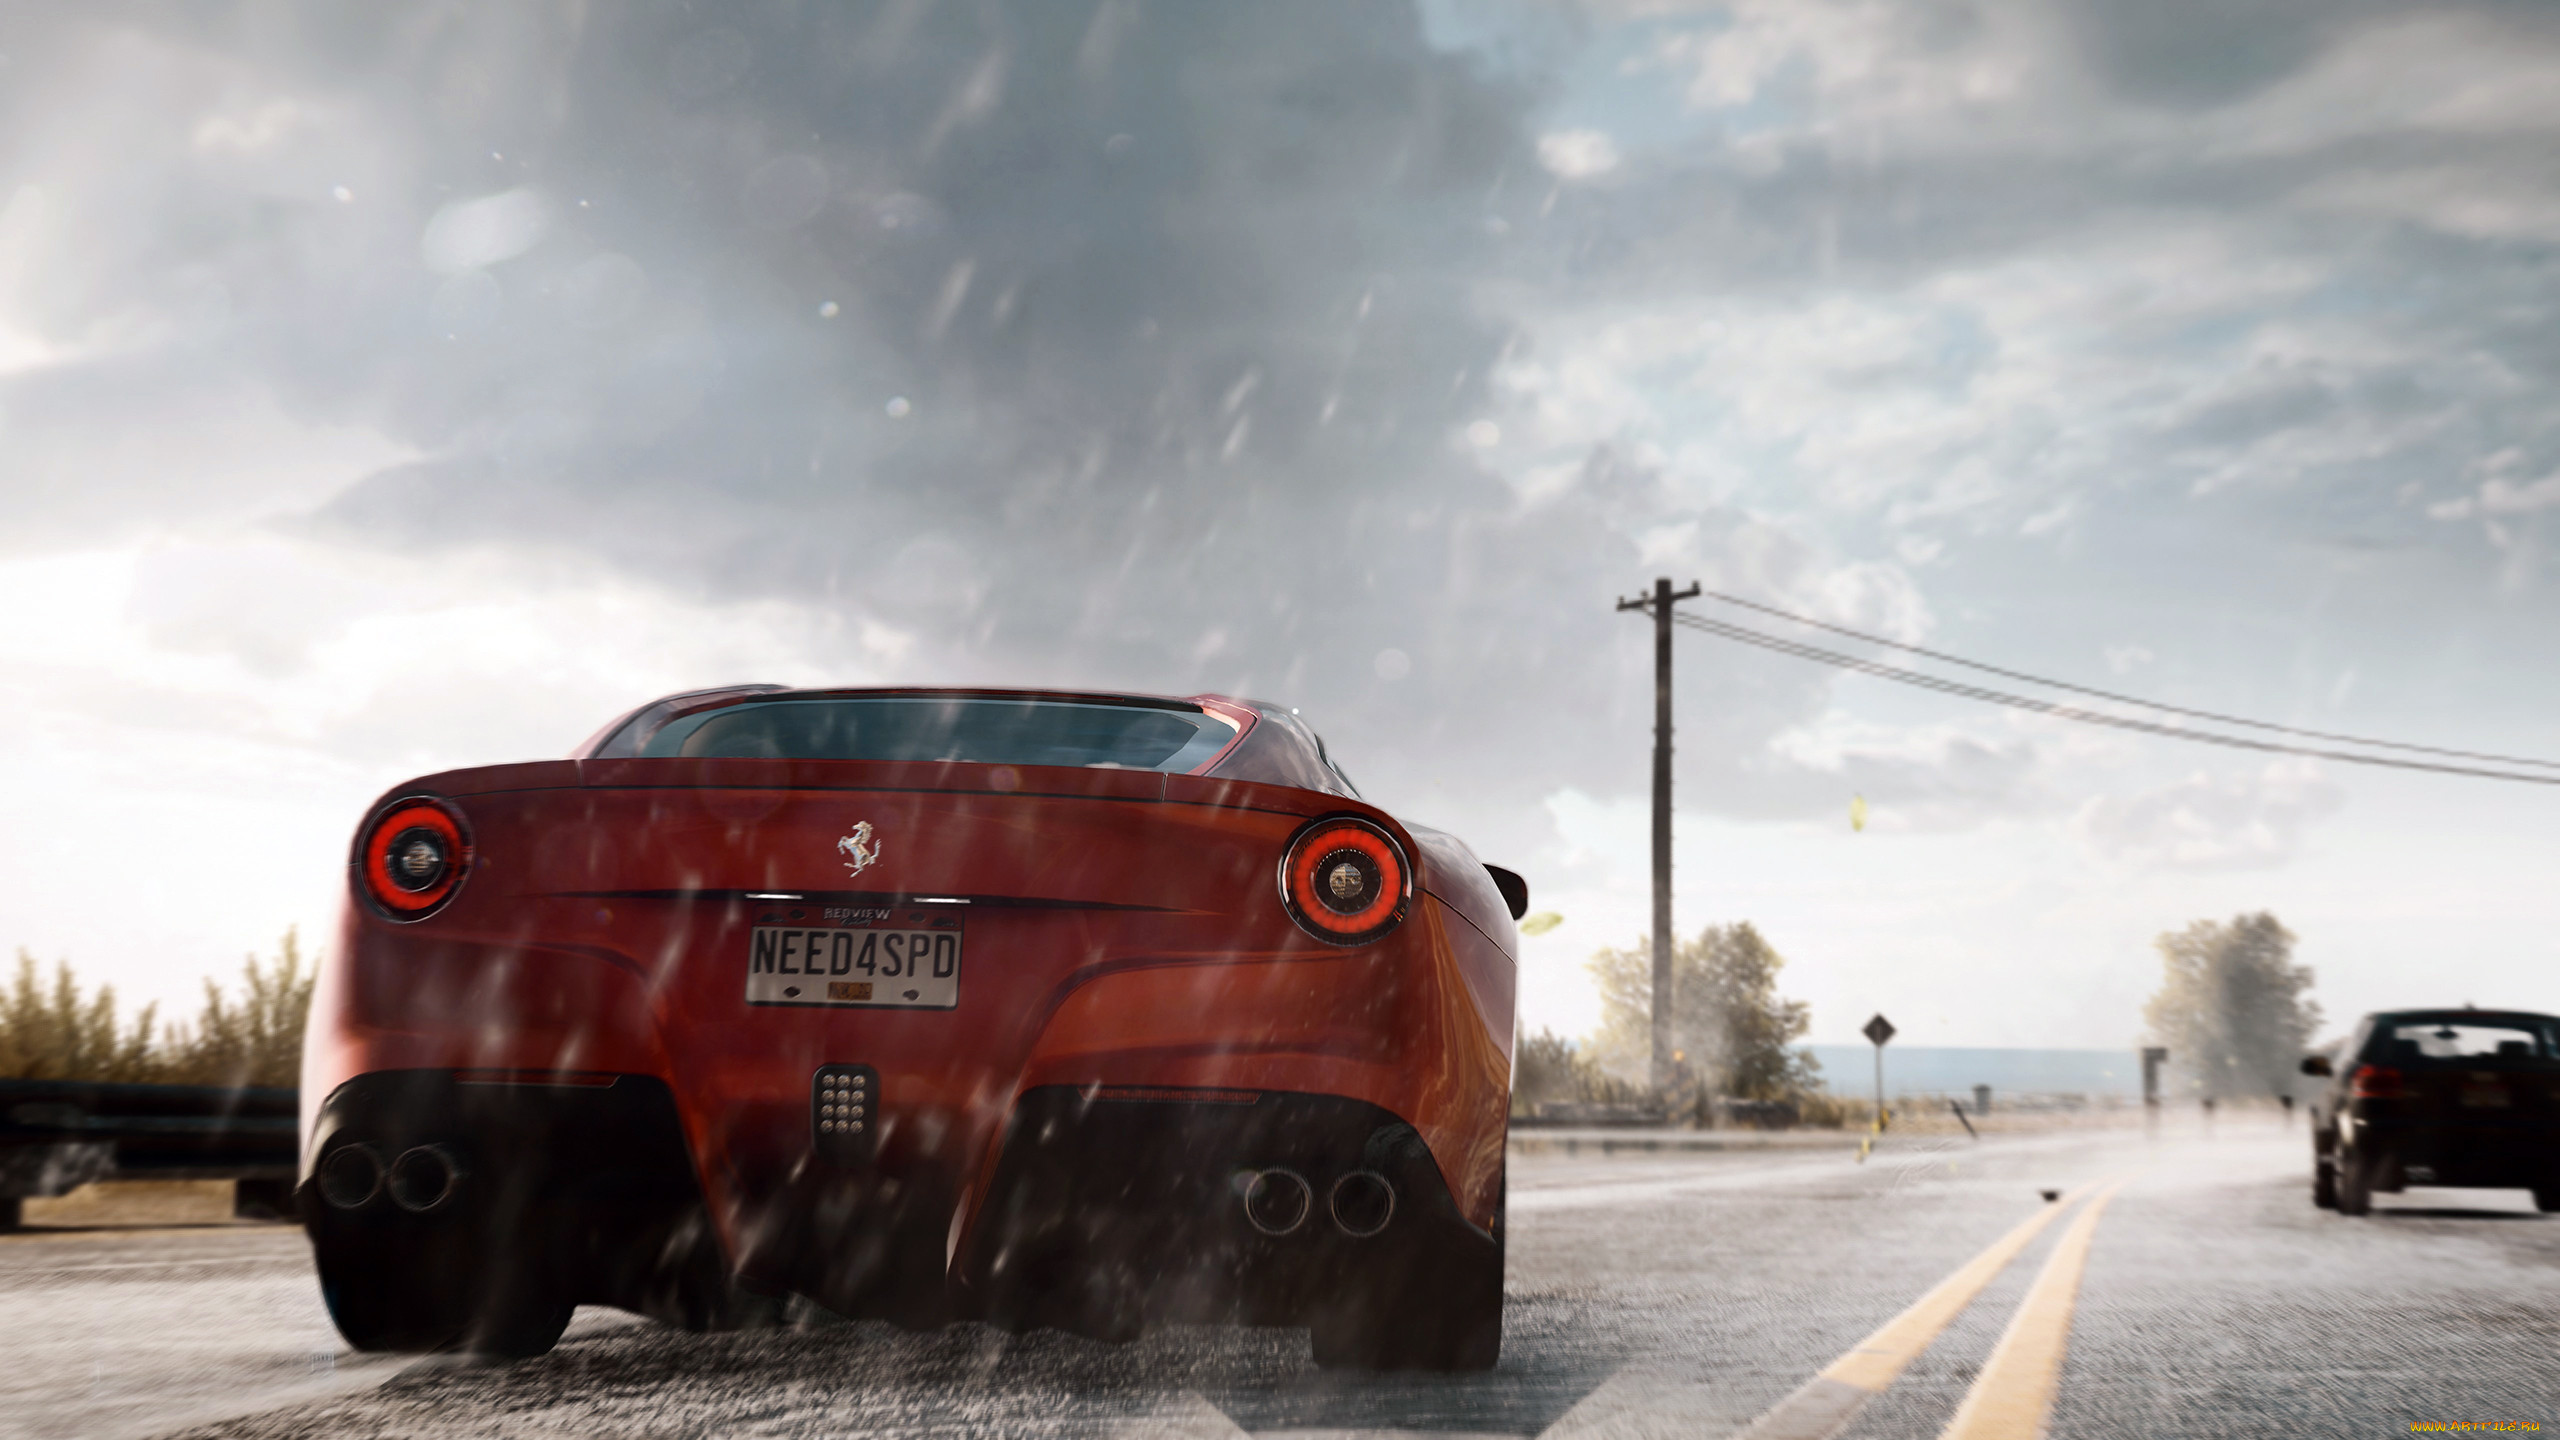 Need for Speed Rivals 2013